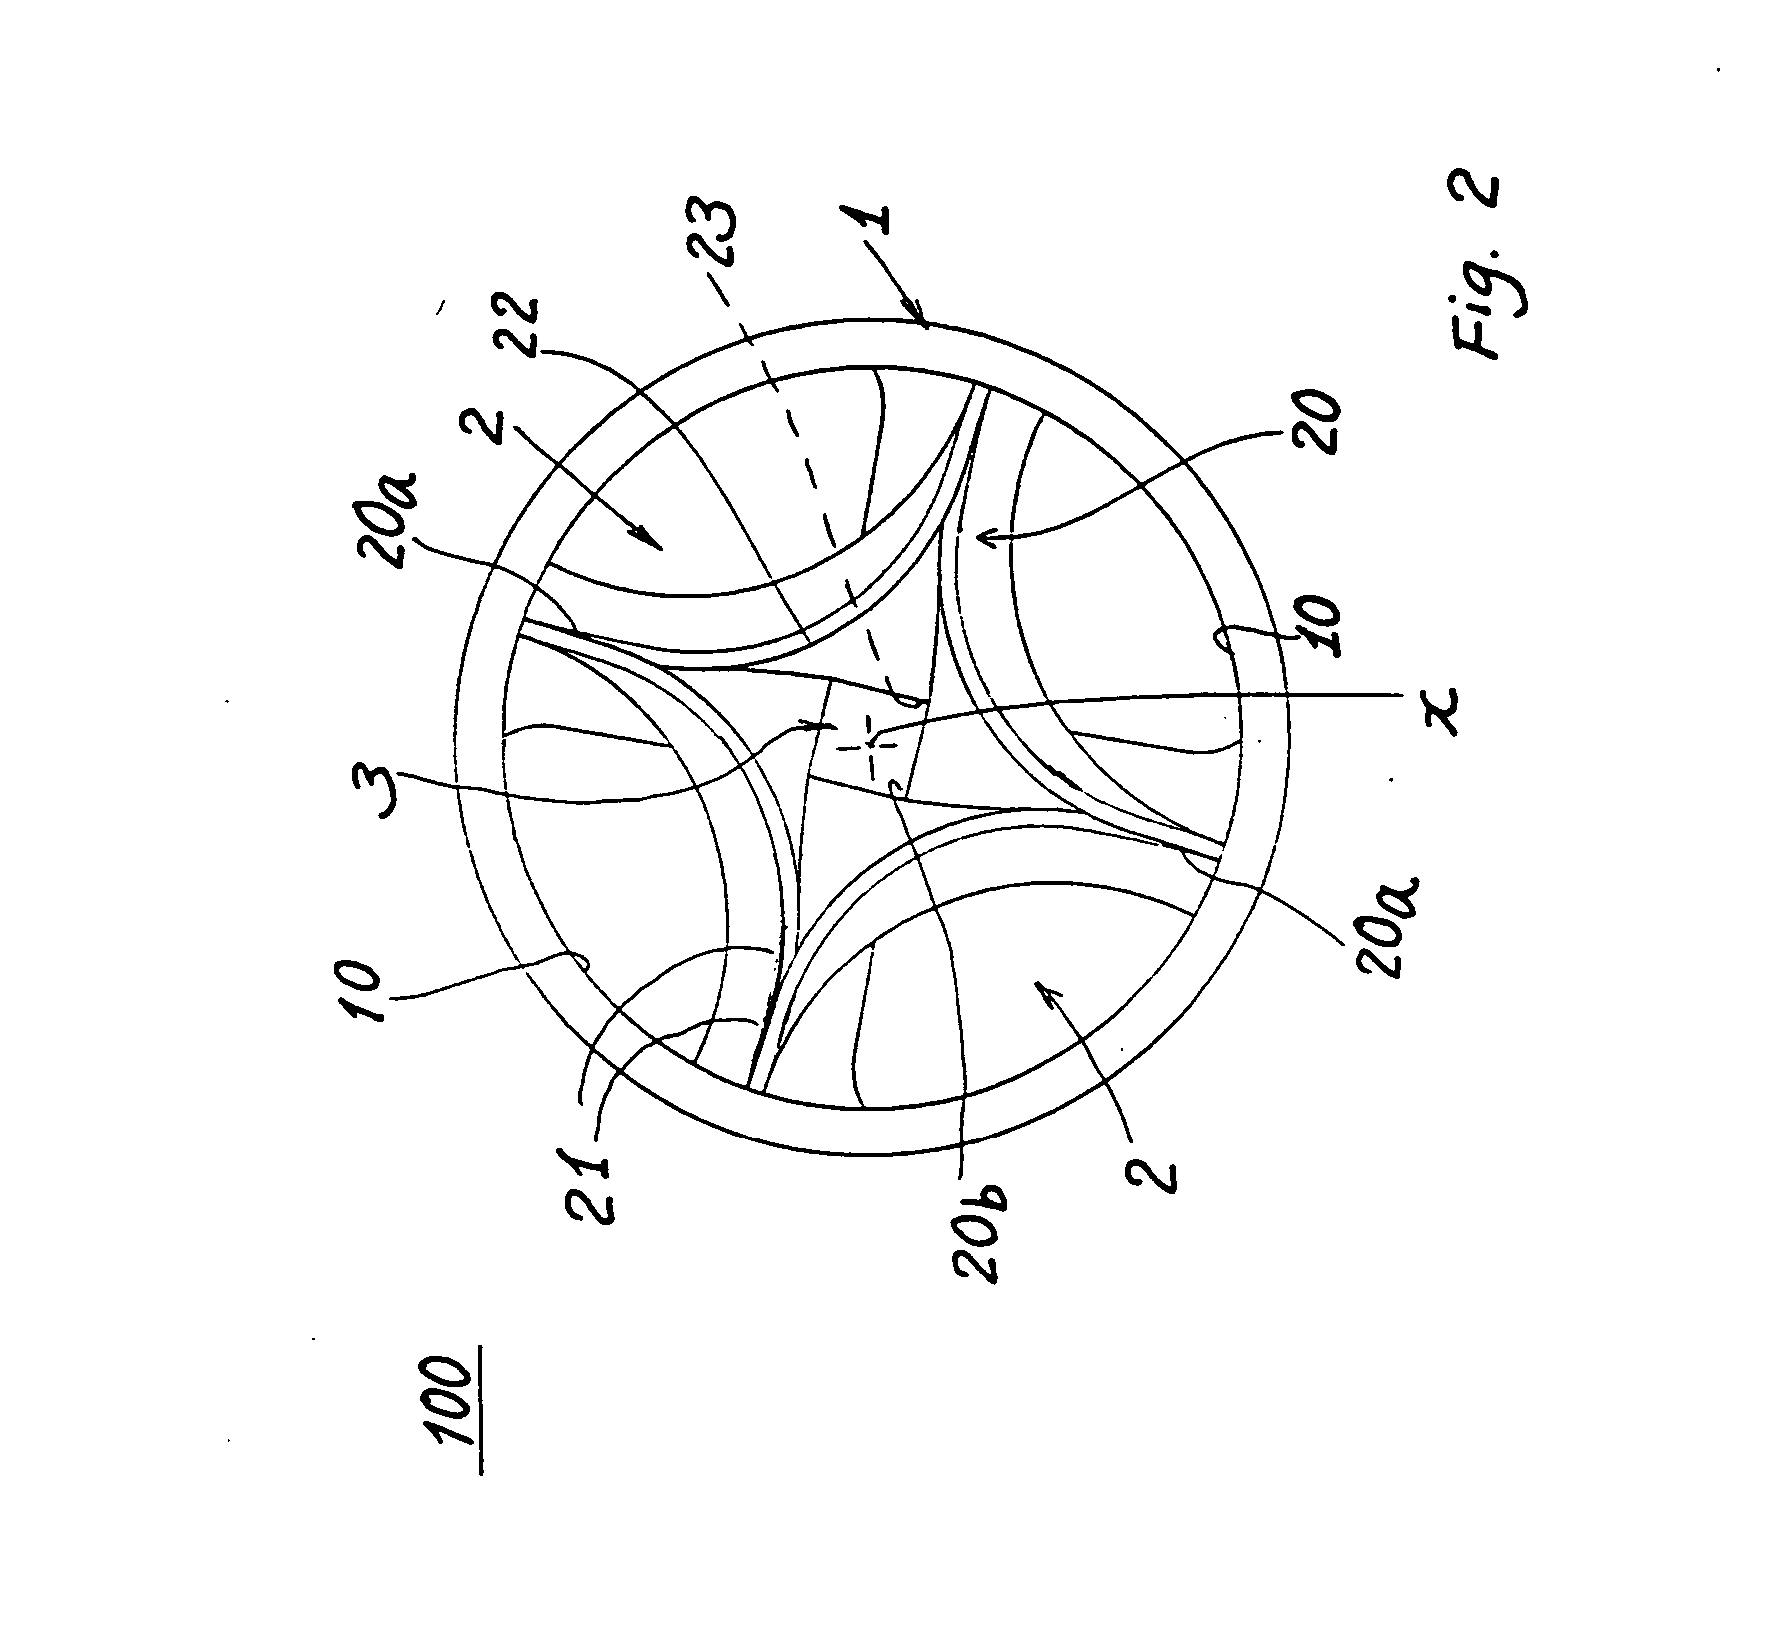 Air swirling device